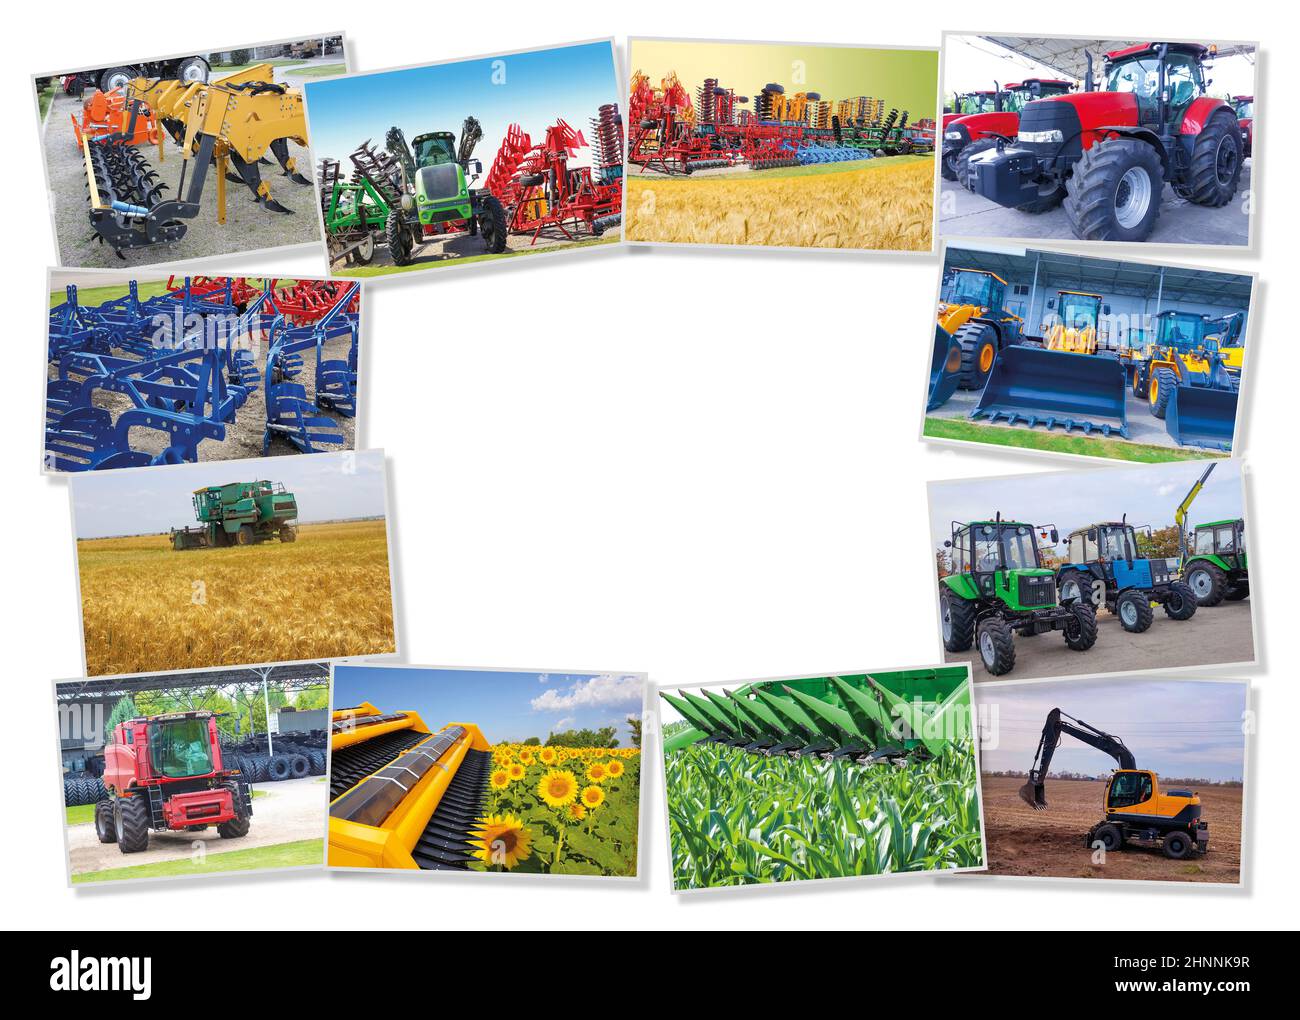 Collage about farm, agriculture, farming. Concept of equipment readiness for agricultural work - for sowing and harvesting wheat Stock Photo